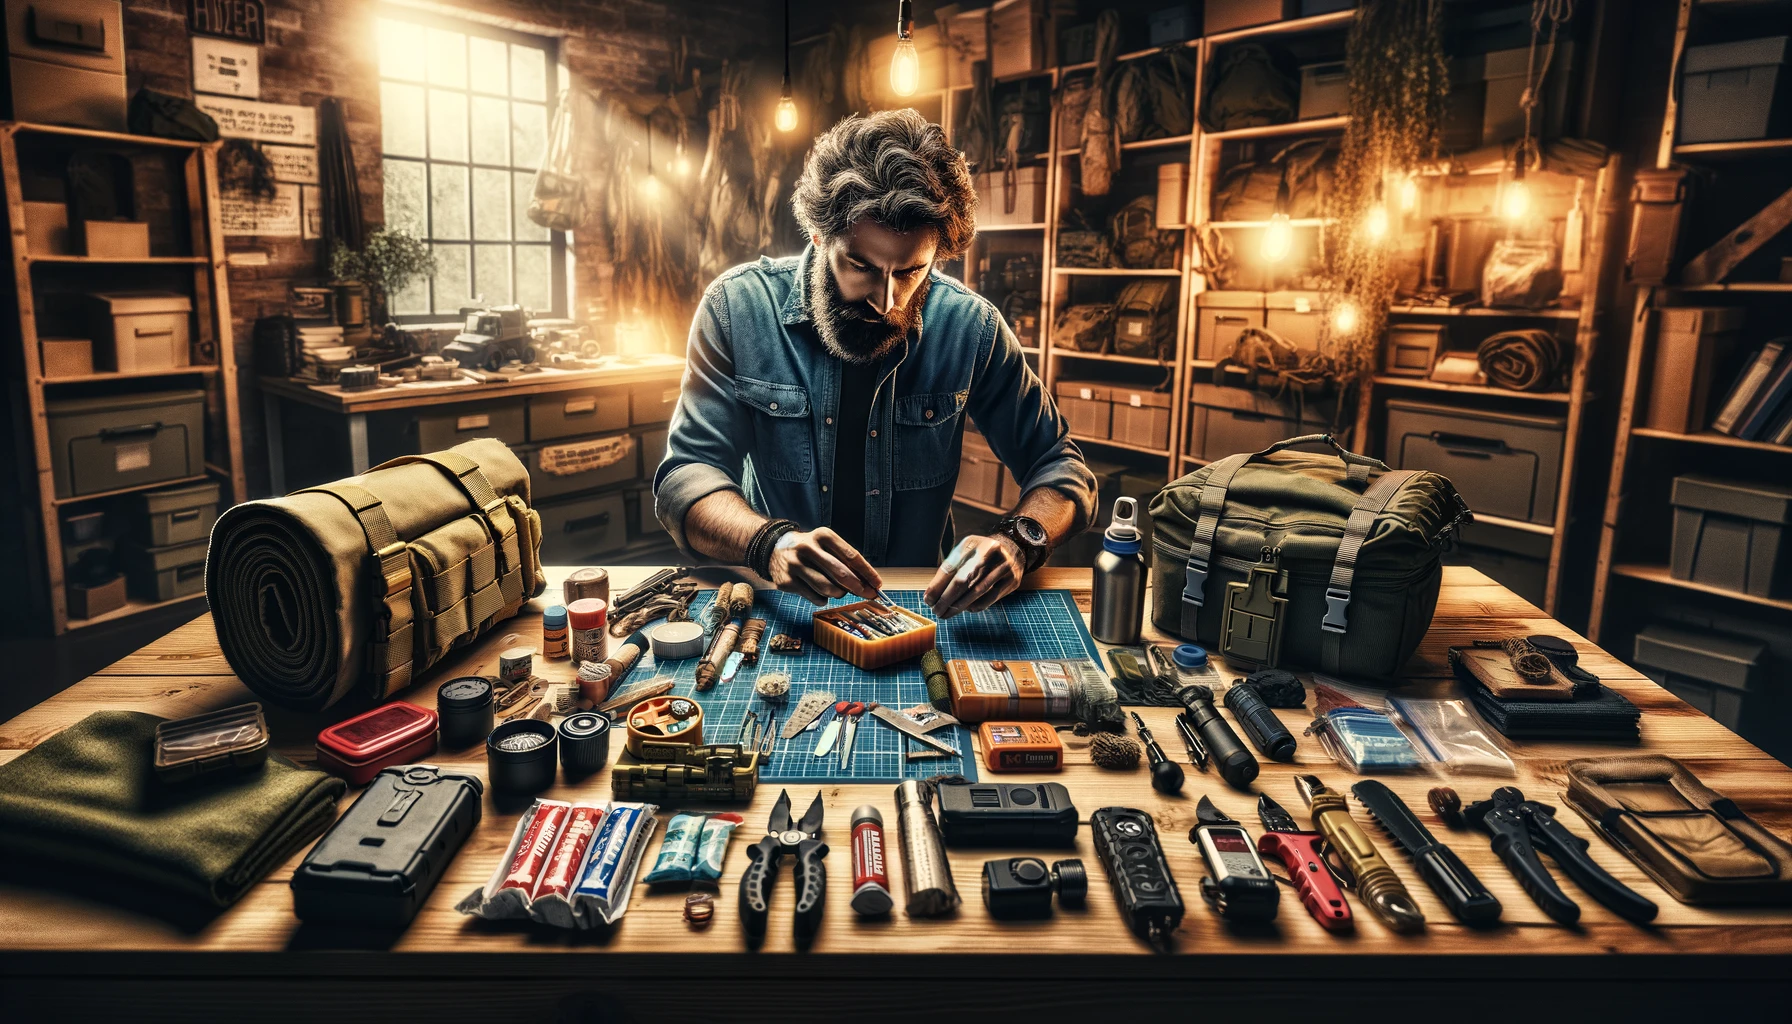 A survival expert in a workshop meticulously assembles a comprehensive bug out bag with essential survival items, demonstrating thoughtful preparation and expertise